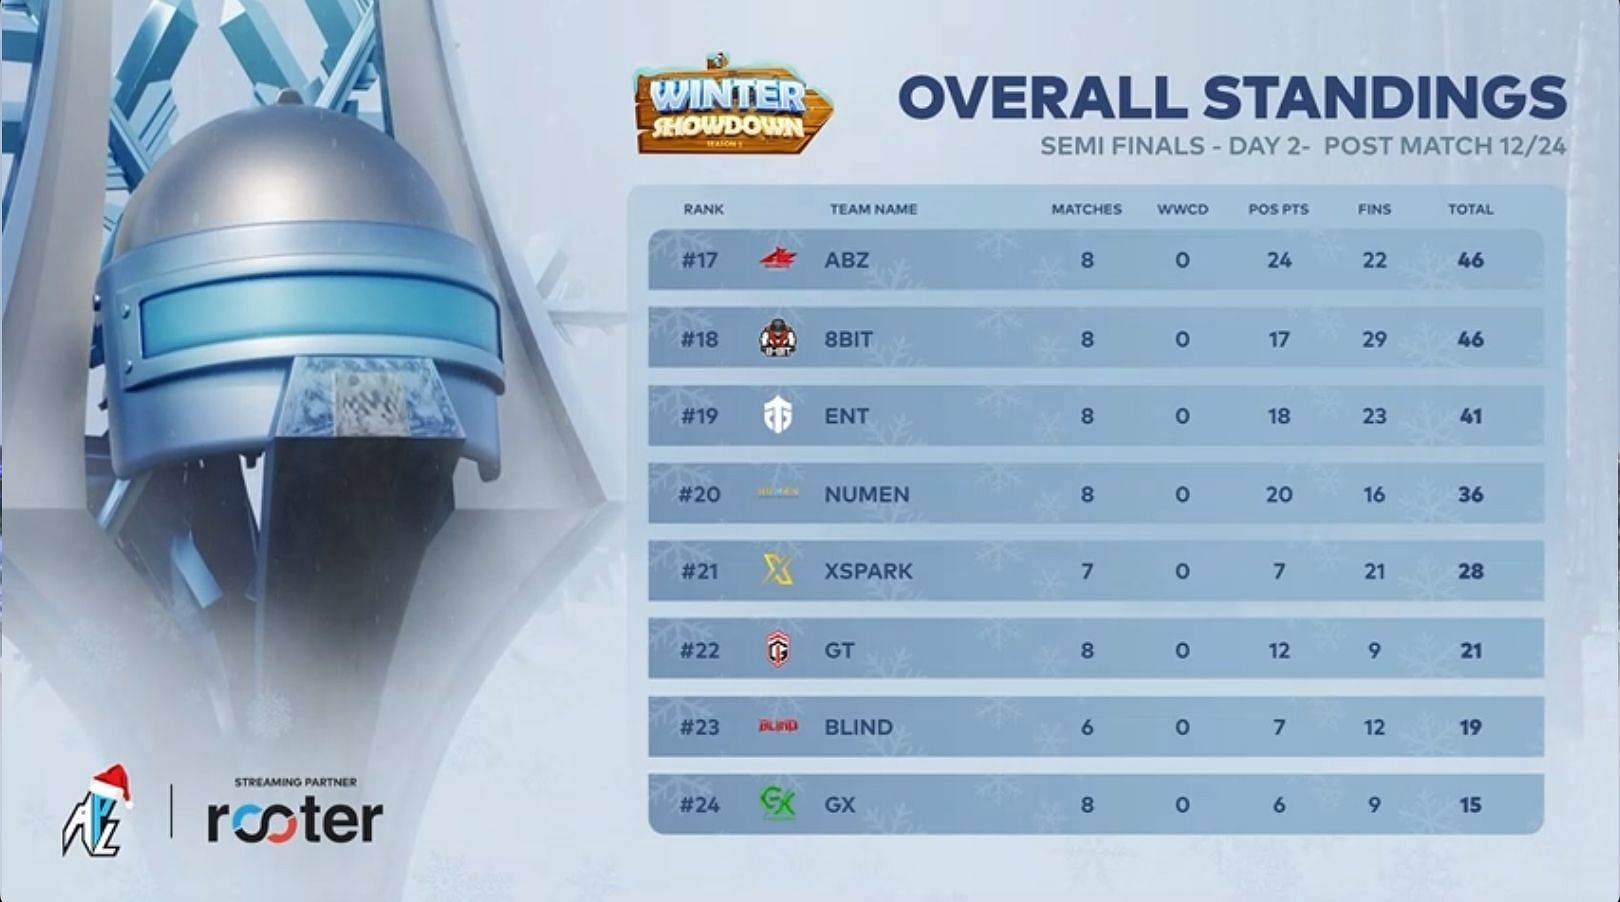 Blind Esports struggled in first two days of Semifinals (Image via Rooter)